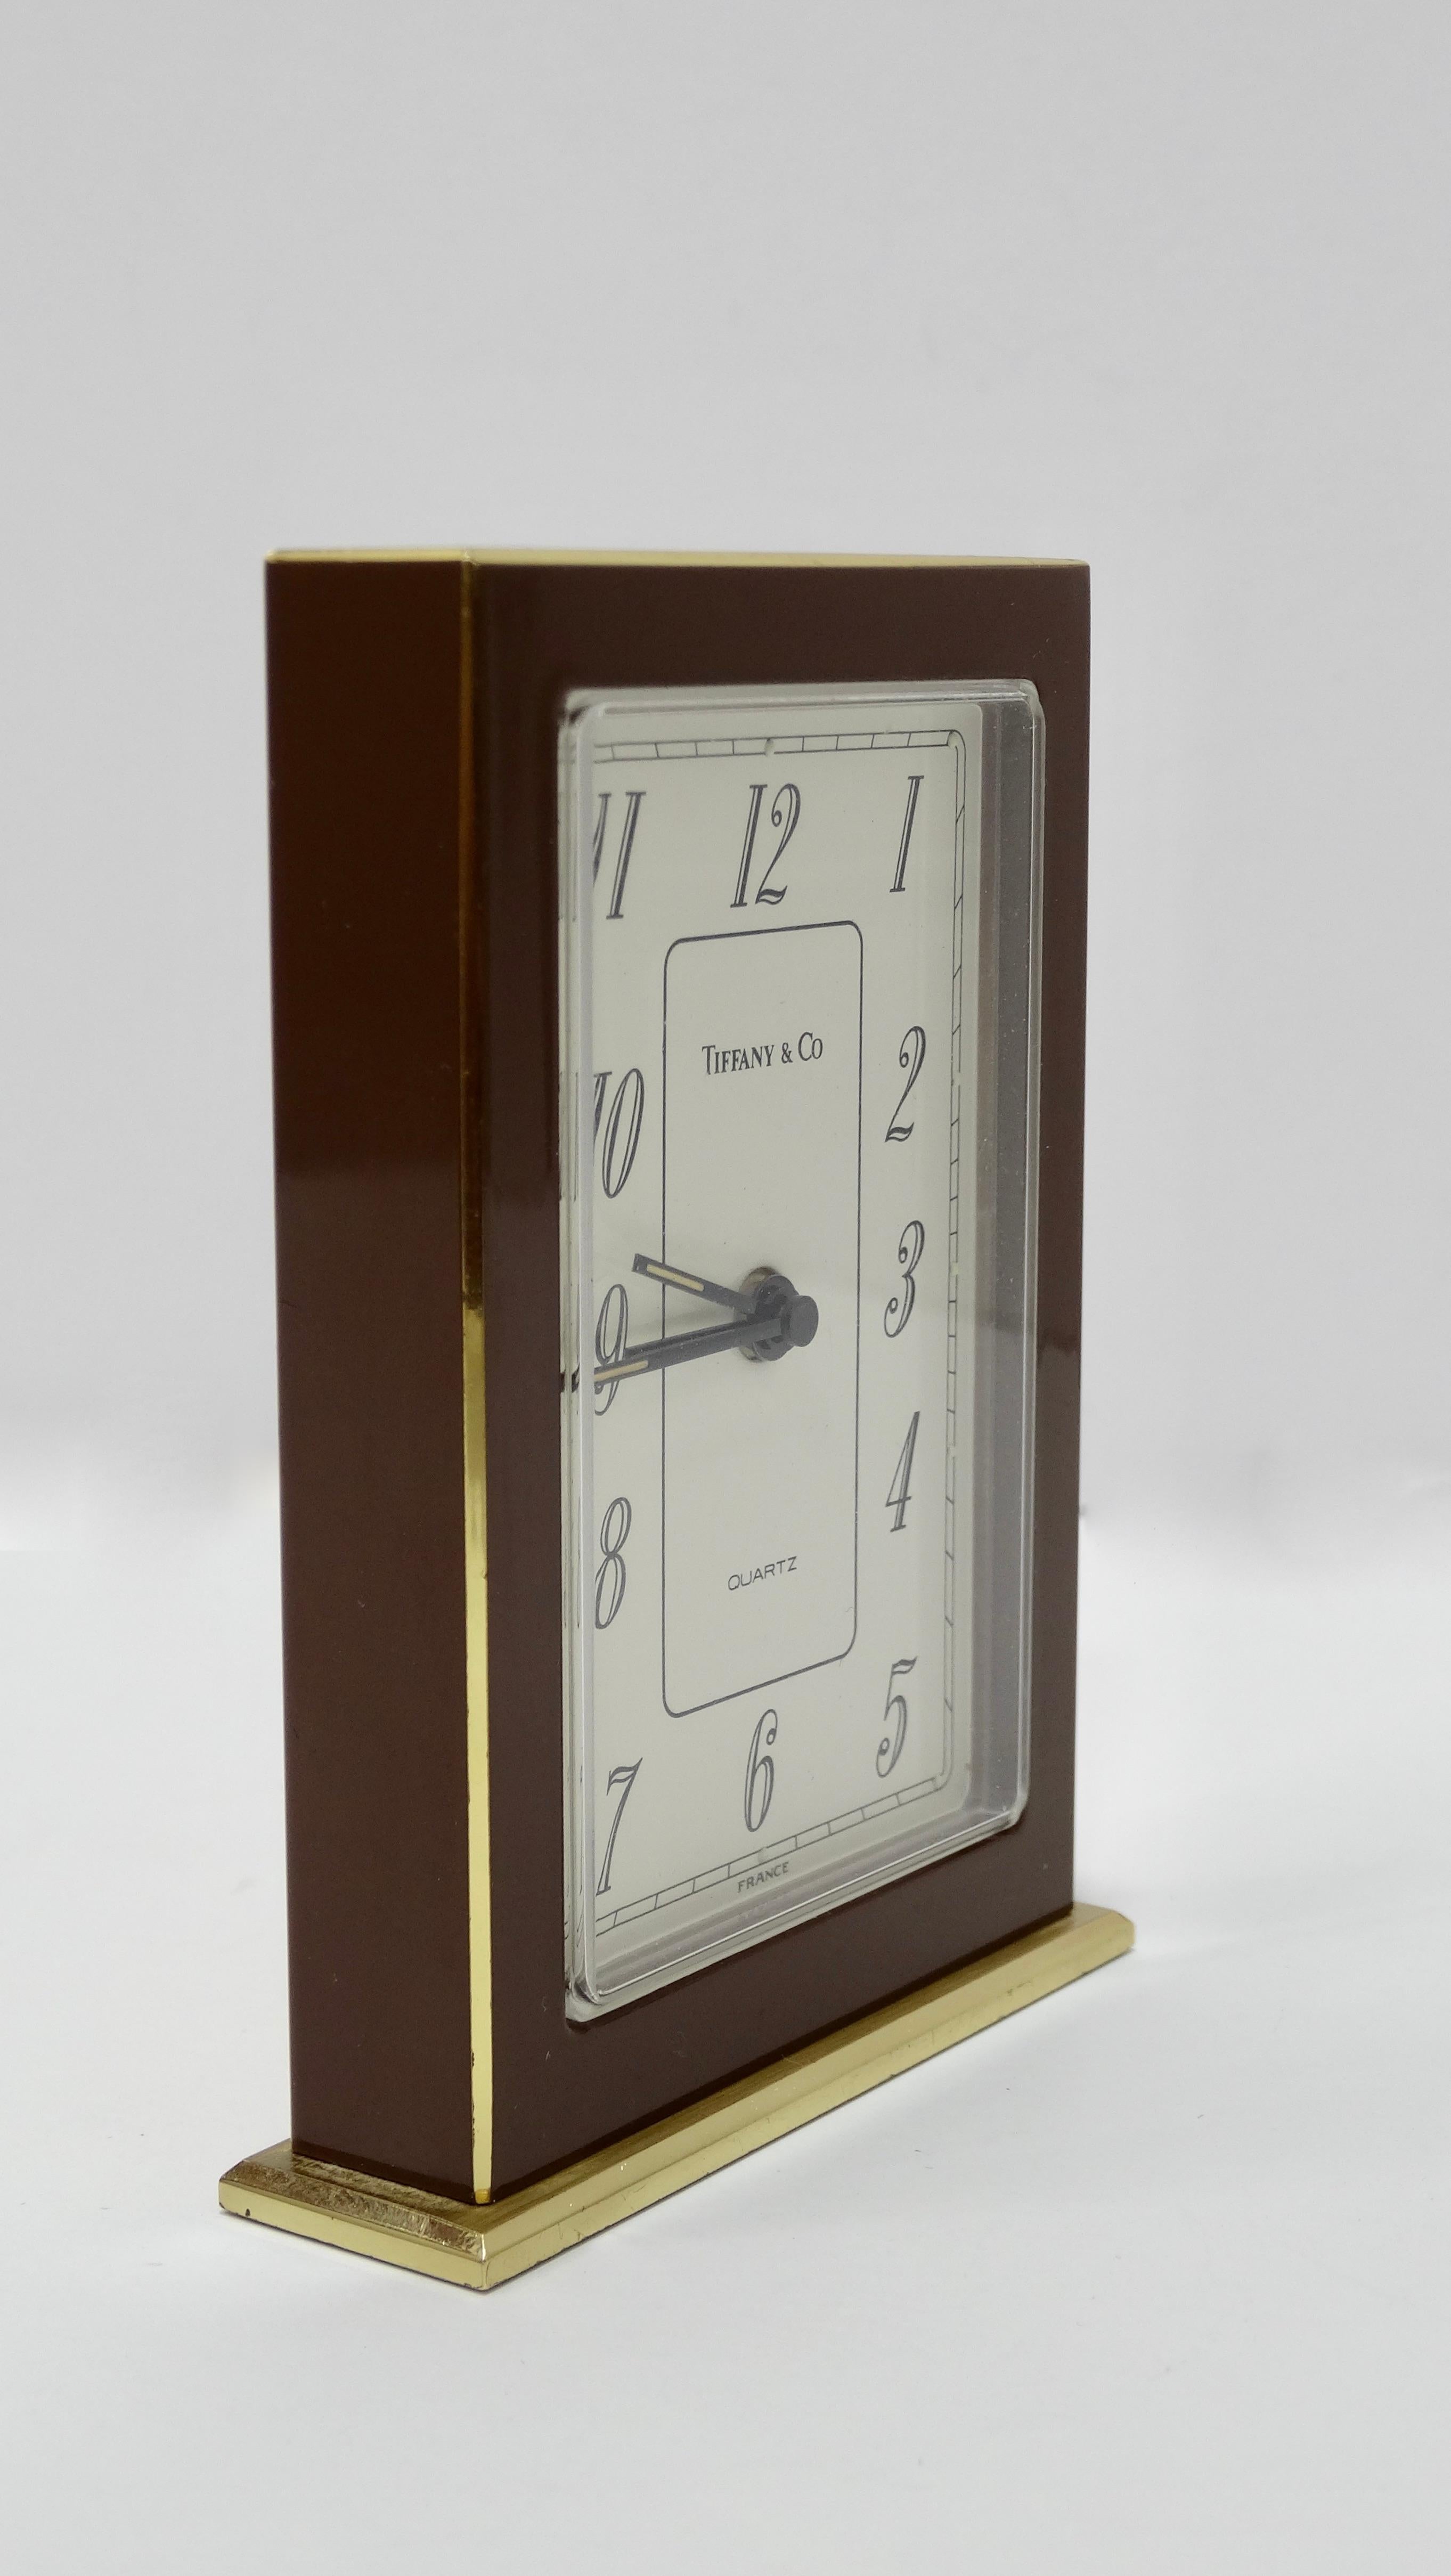 Elevate your desk with this Tiffany & Co. clock! Circa 1960s and made in France, this simple art deco brass desk clock is a slim rectangular shape quartz movement and features brown enamel with a white face and black numbers for a clean and timeless